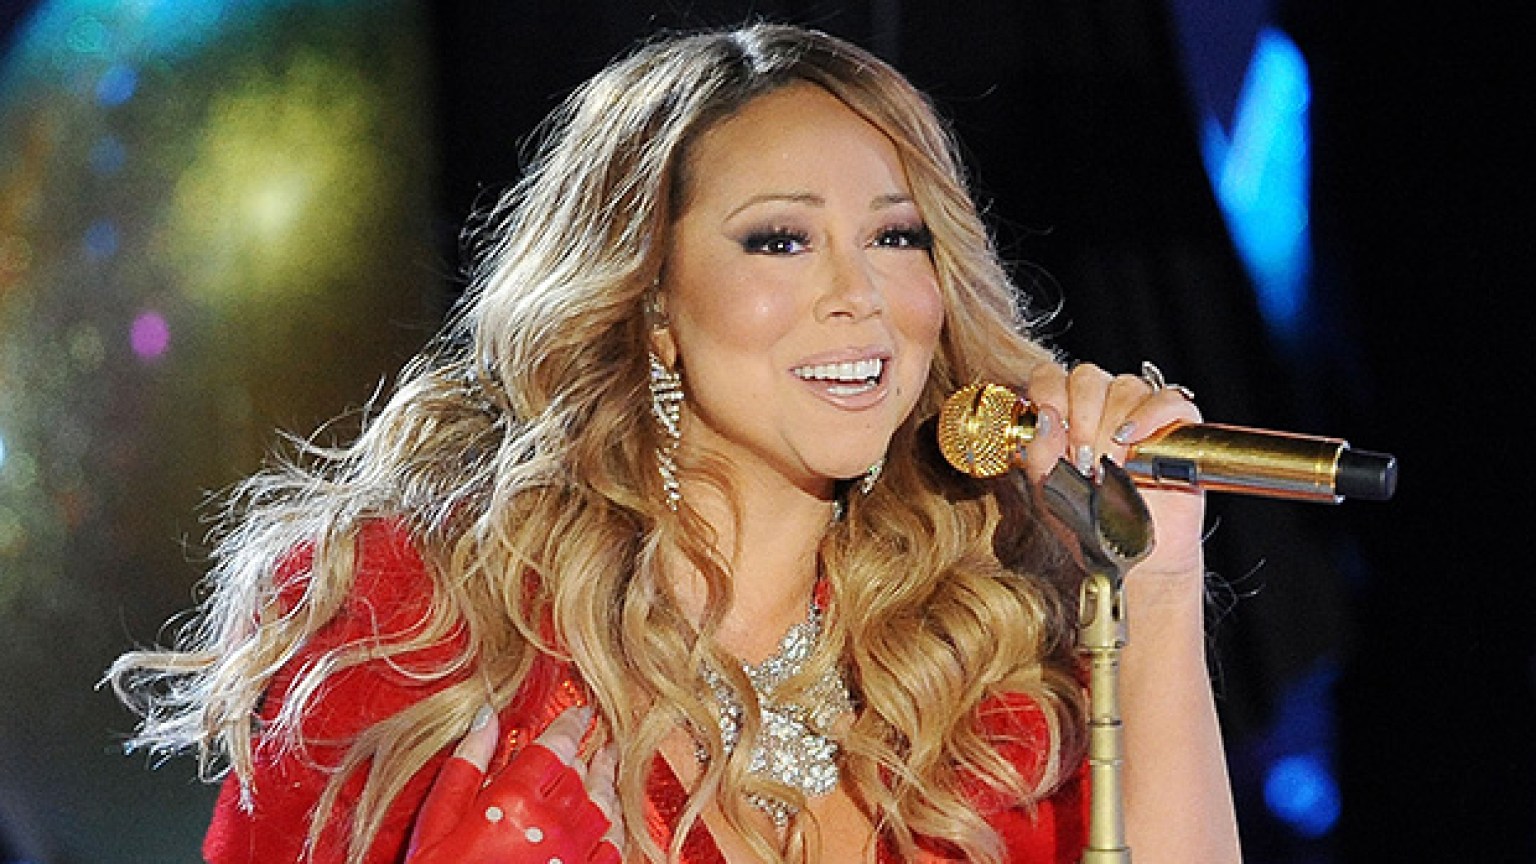 Mariah Carey steps into a hot tub in a long red sequin dress to ring in